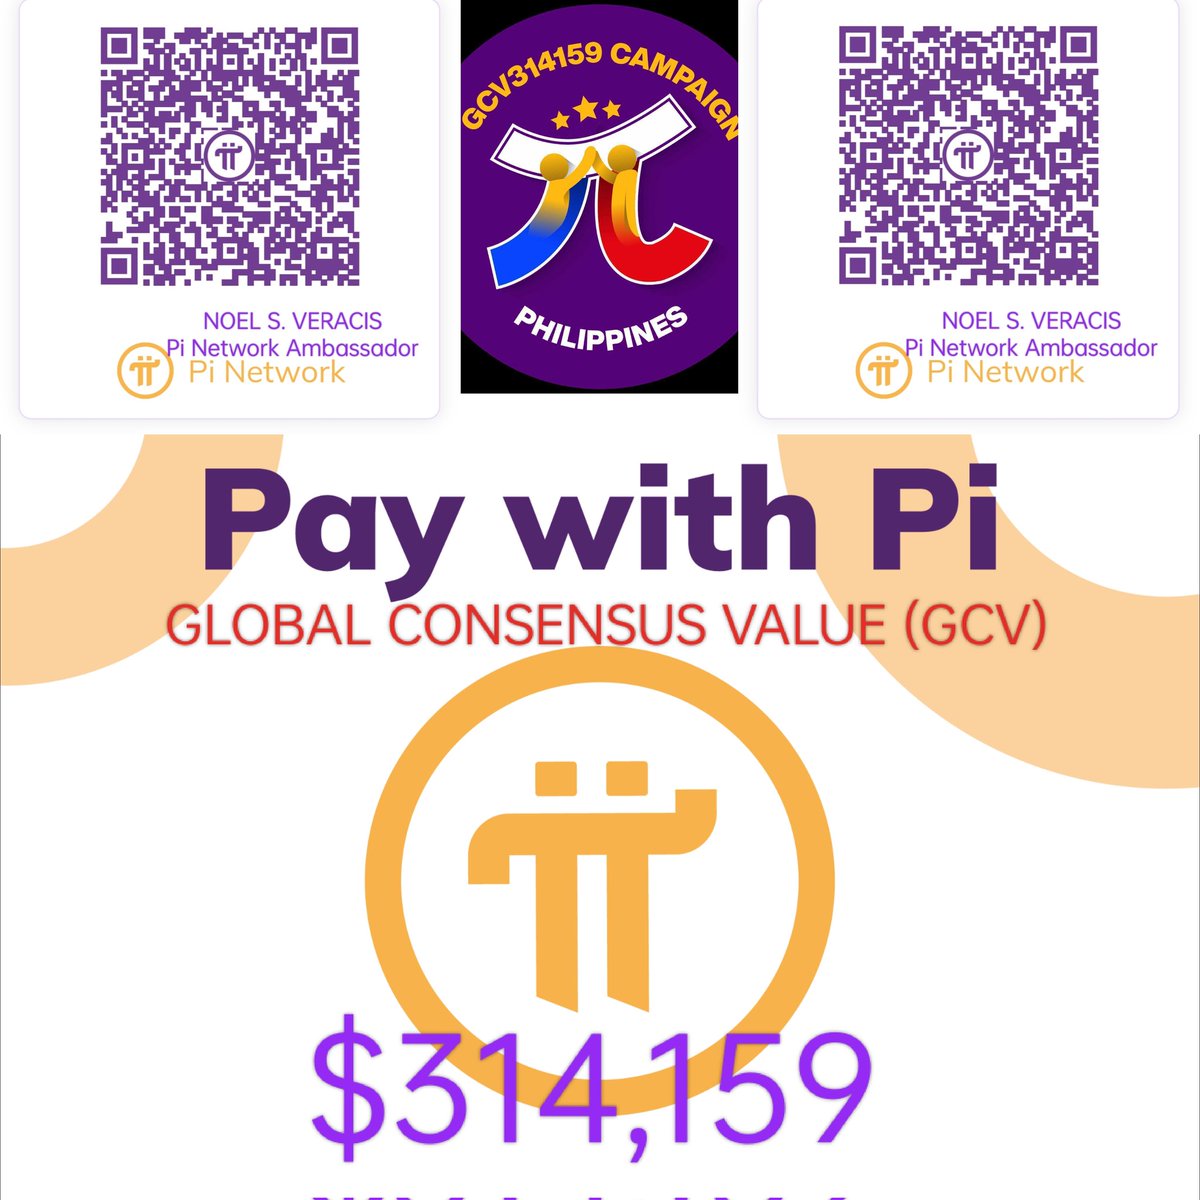 I am now accepting Pi coins in return for buying Health & Home books from the Philippine Publishing House! Just message me! 
#PiNetwork #Pioneers #OM #GCV #PiDay #Lumaripi #DorisYin #trending2024